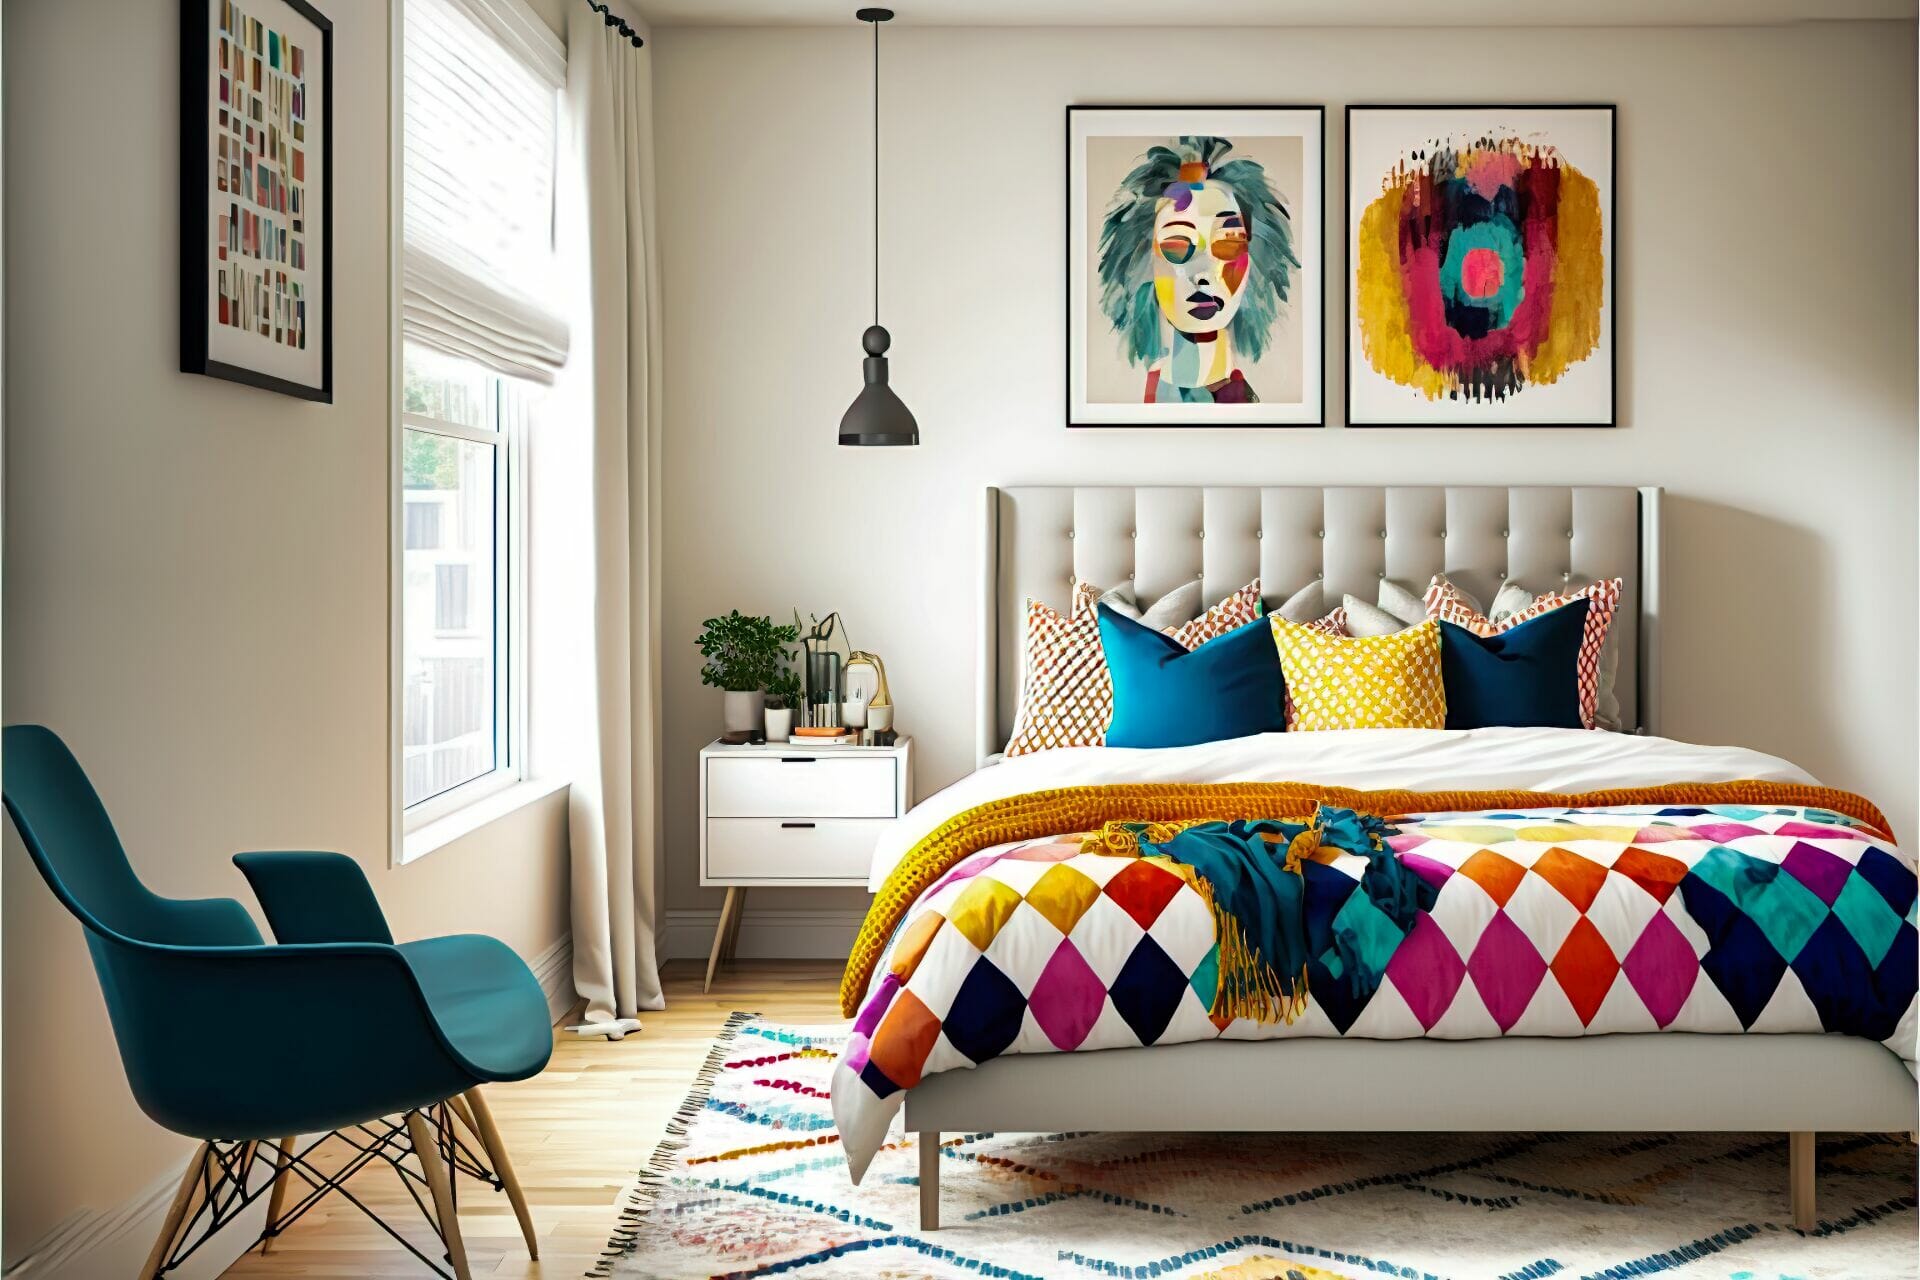 A Scandinavian Style Bedroom With Colorful Touches - This Modern Bedroom Features A Bright And Bold Color Palette, With Light Wood Floors And White Walls For A Crisp Look. A Tufted Bed Frame Is Accented With Colorful Pillows And A Patterned Throw Blanket, While A Geometric Area Rug And Vibrant Wall Art Add A Playful Touch.